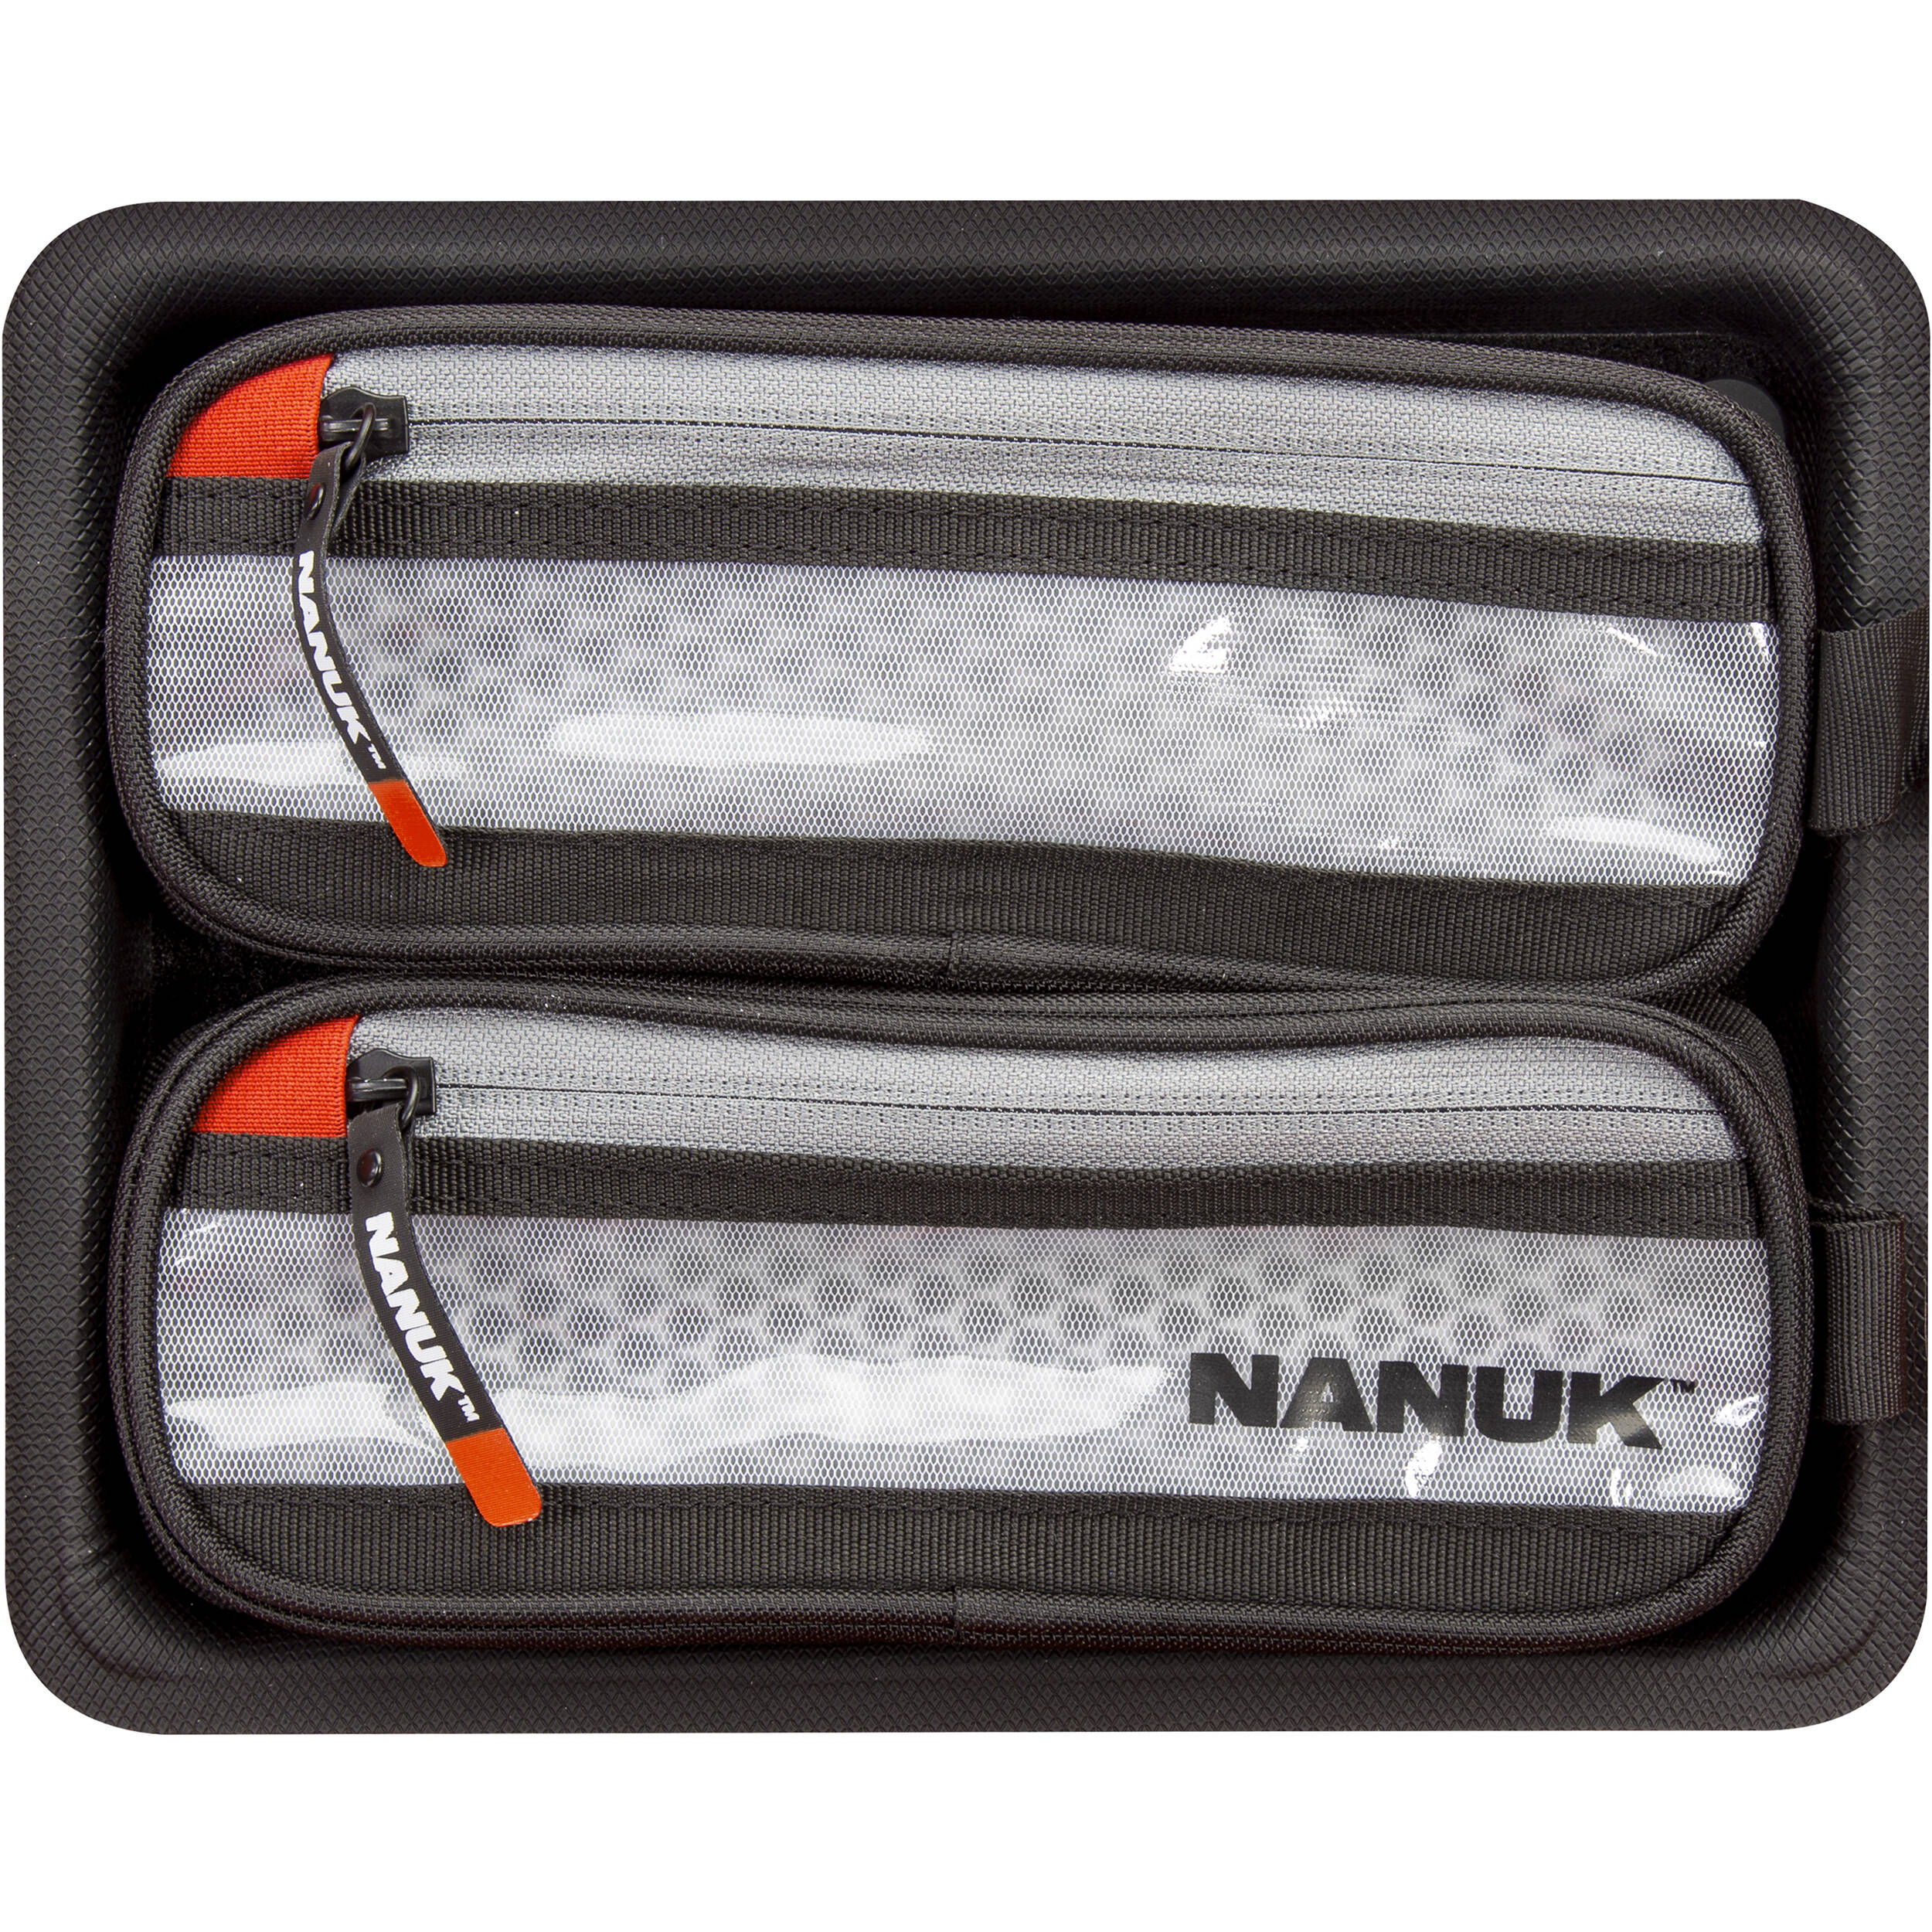 Nanuk 905 Waterproof Hard Case Pro Photo/Video Kit with Padded Dividers and Lid Organizer (Silver)